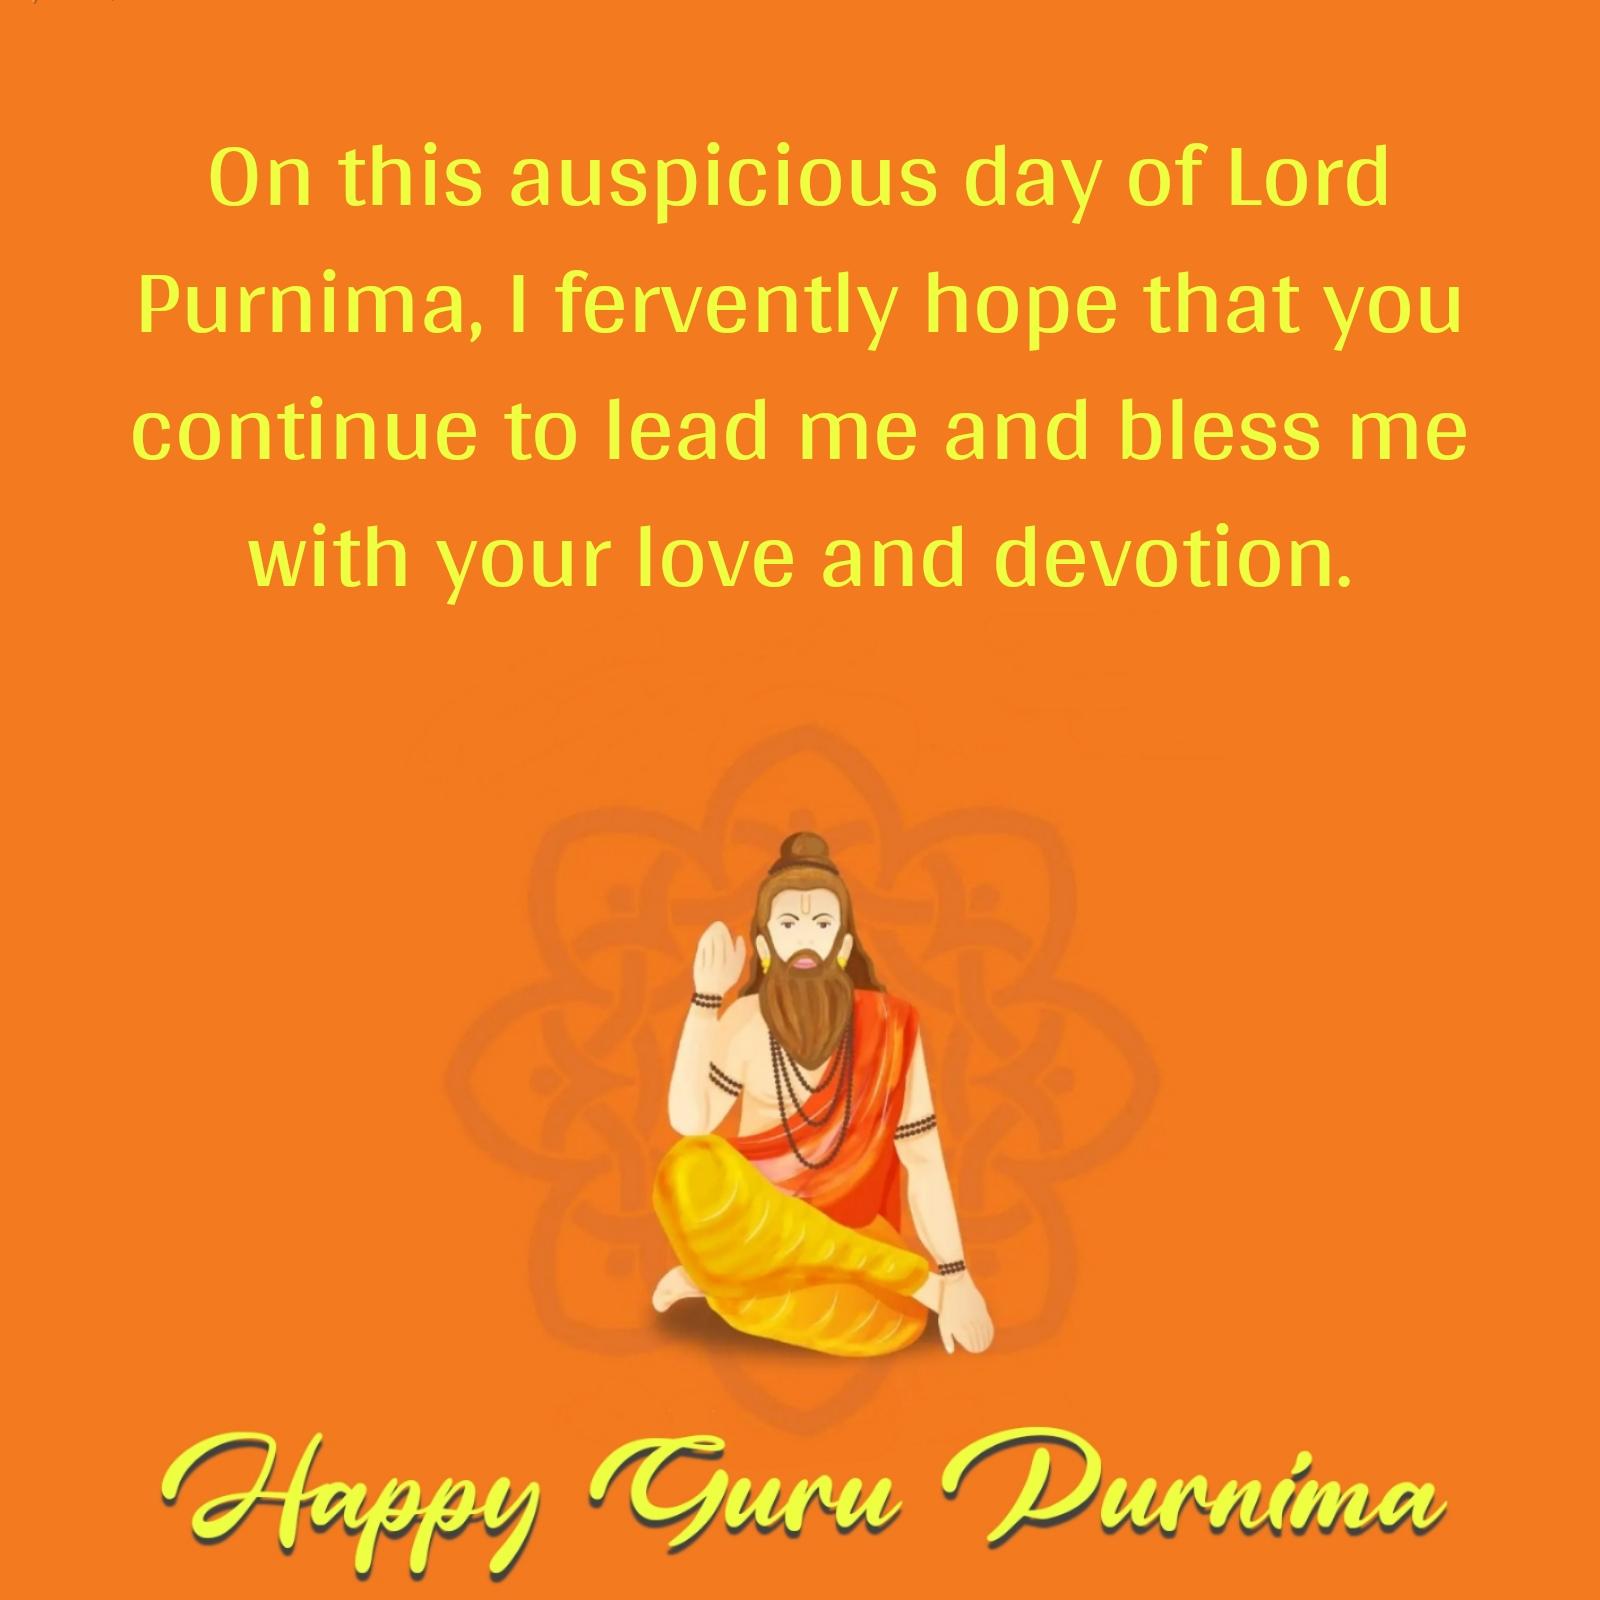 On this auspicious day of Lord Purnima